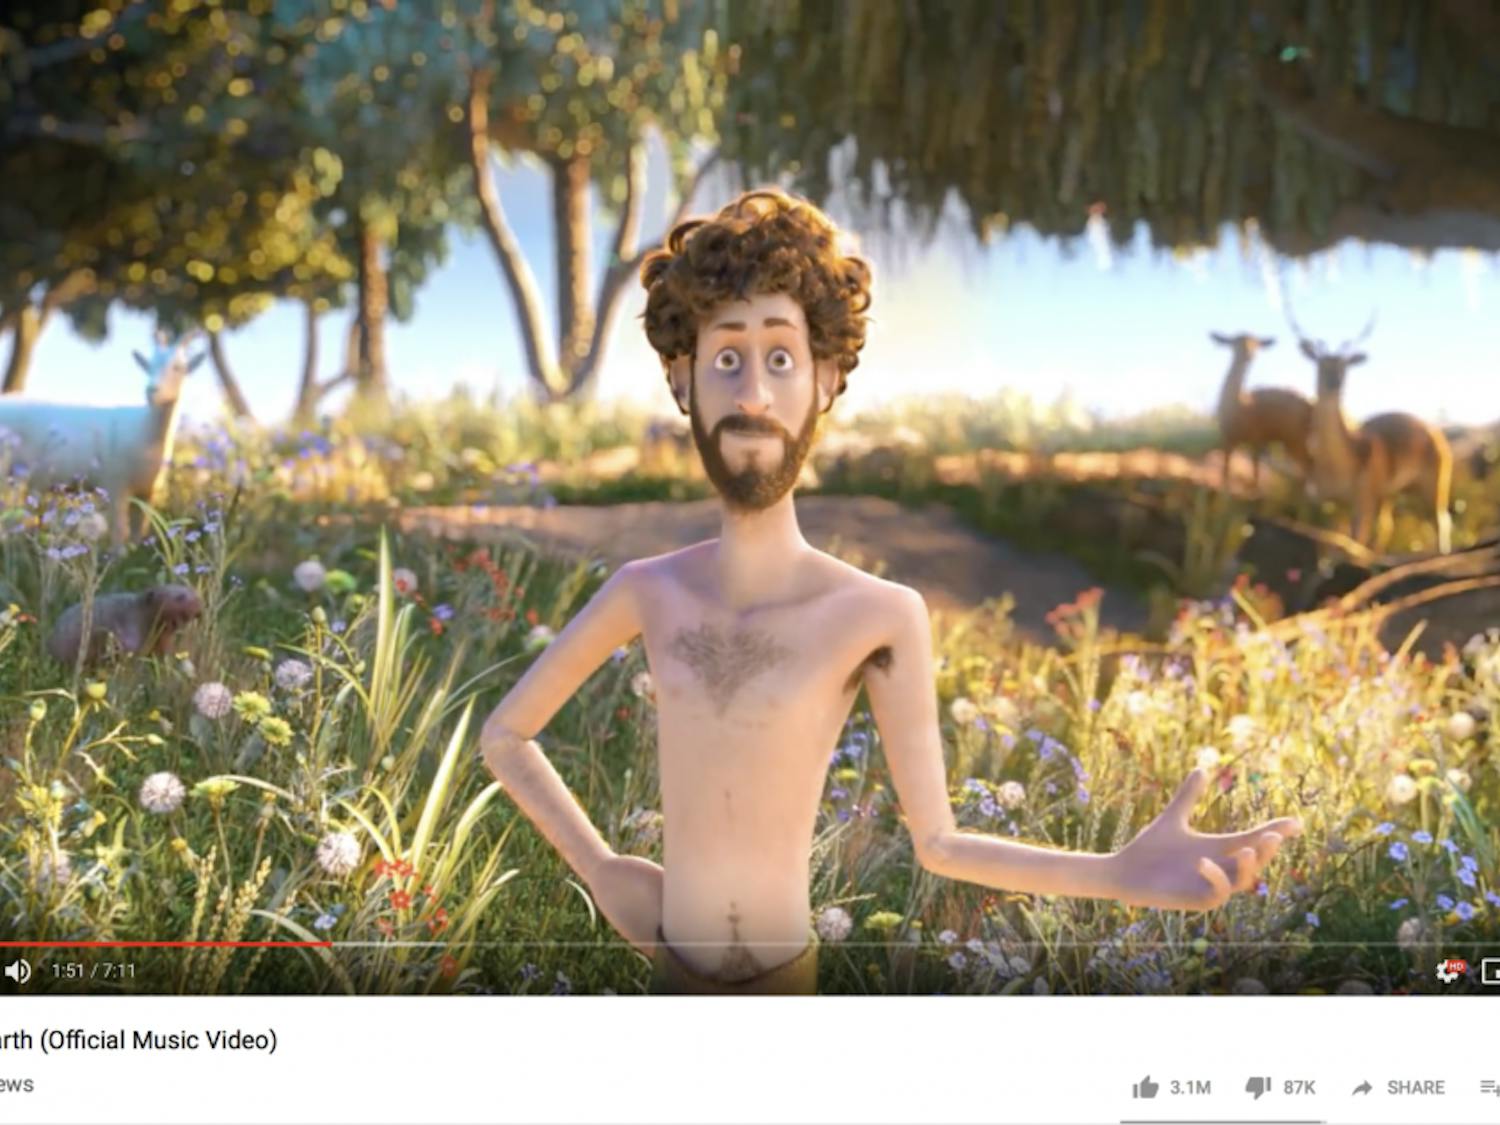 Lil Dicky's "Earth" music video has more than 34 million views.